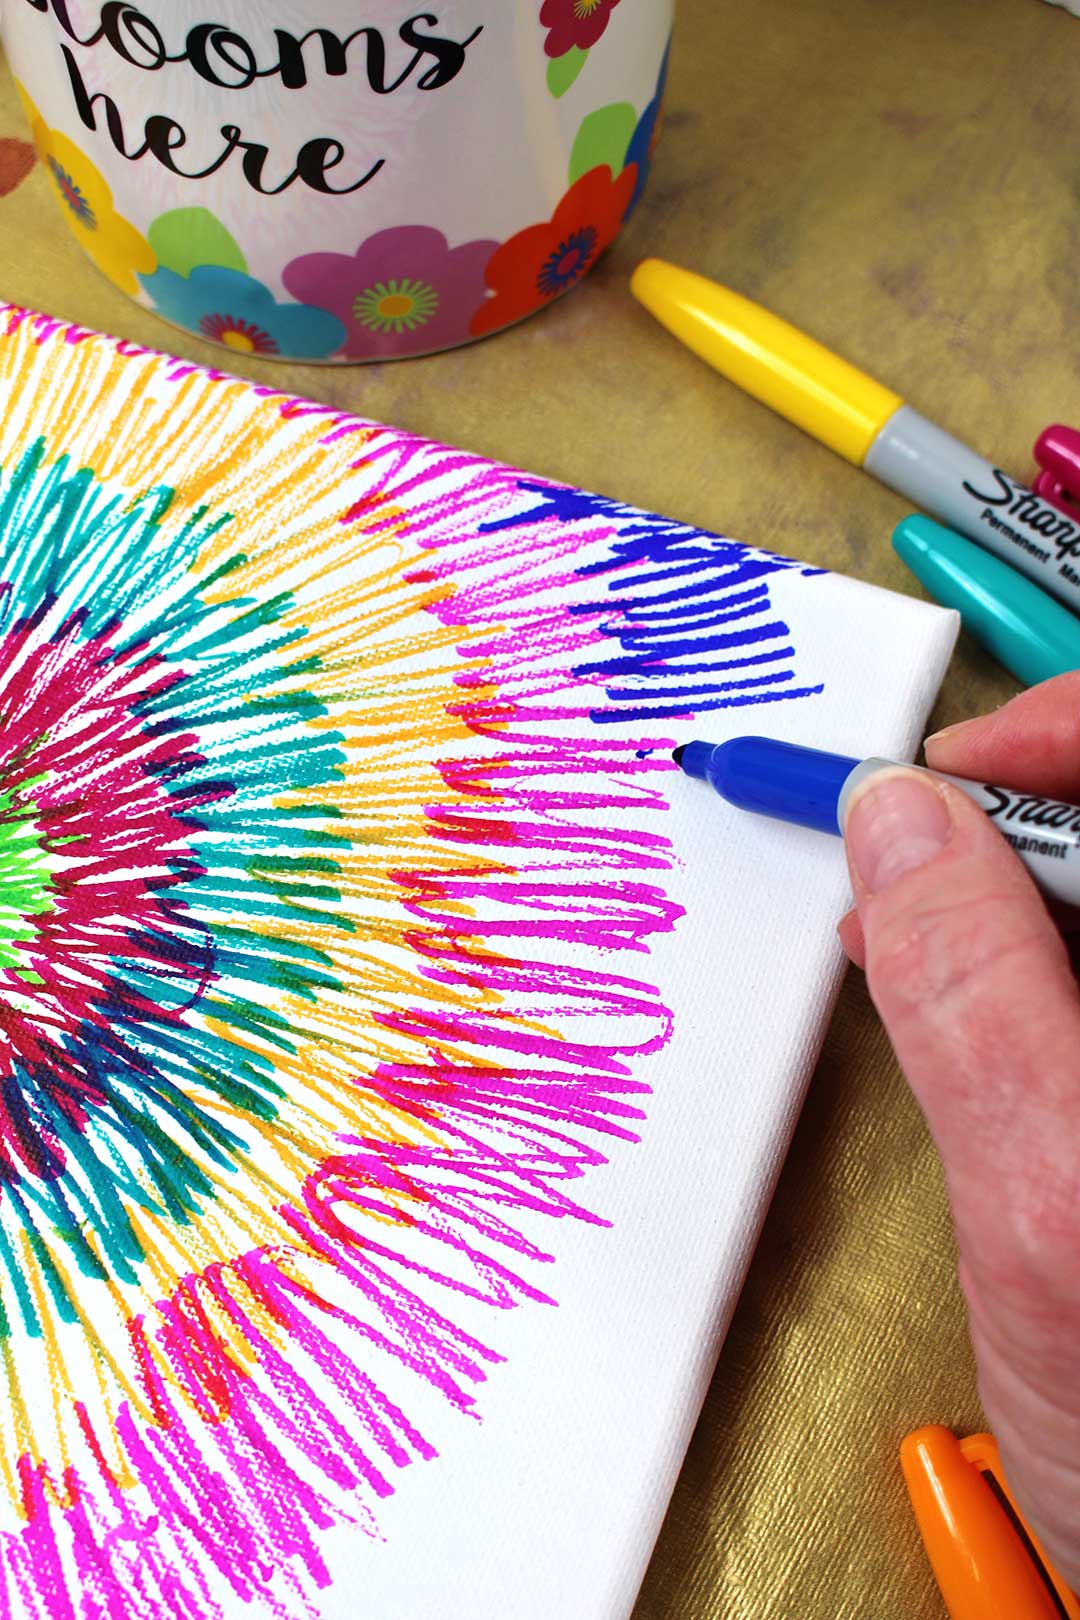 Coloring bright lines on a canvas with a blue sharpie marker.